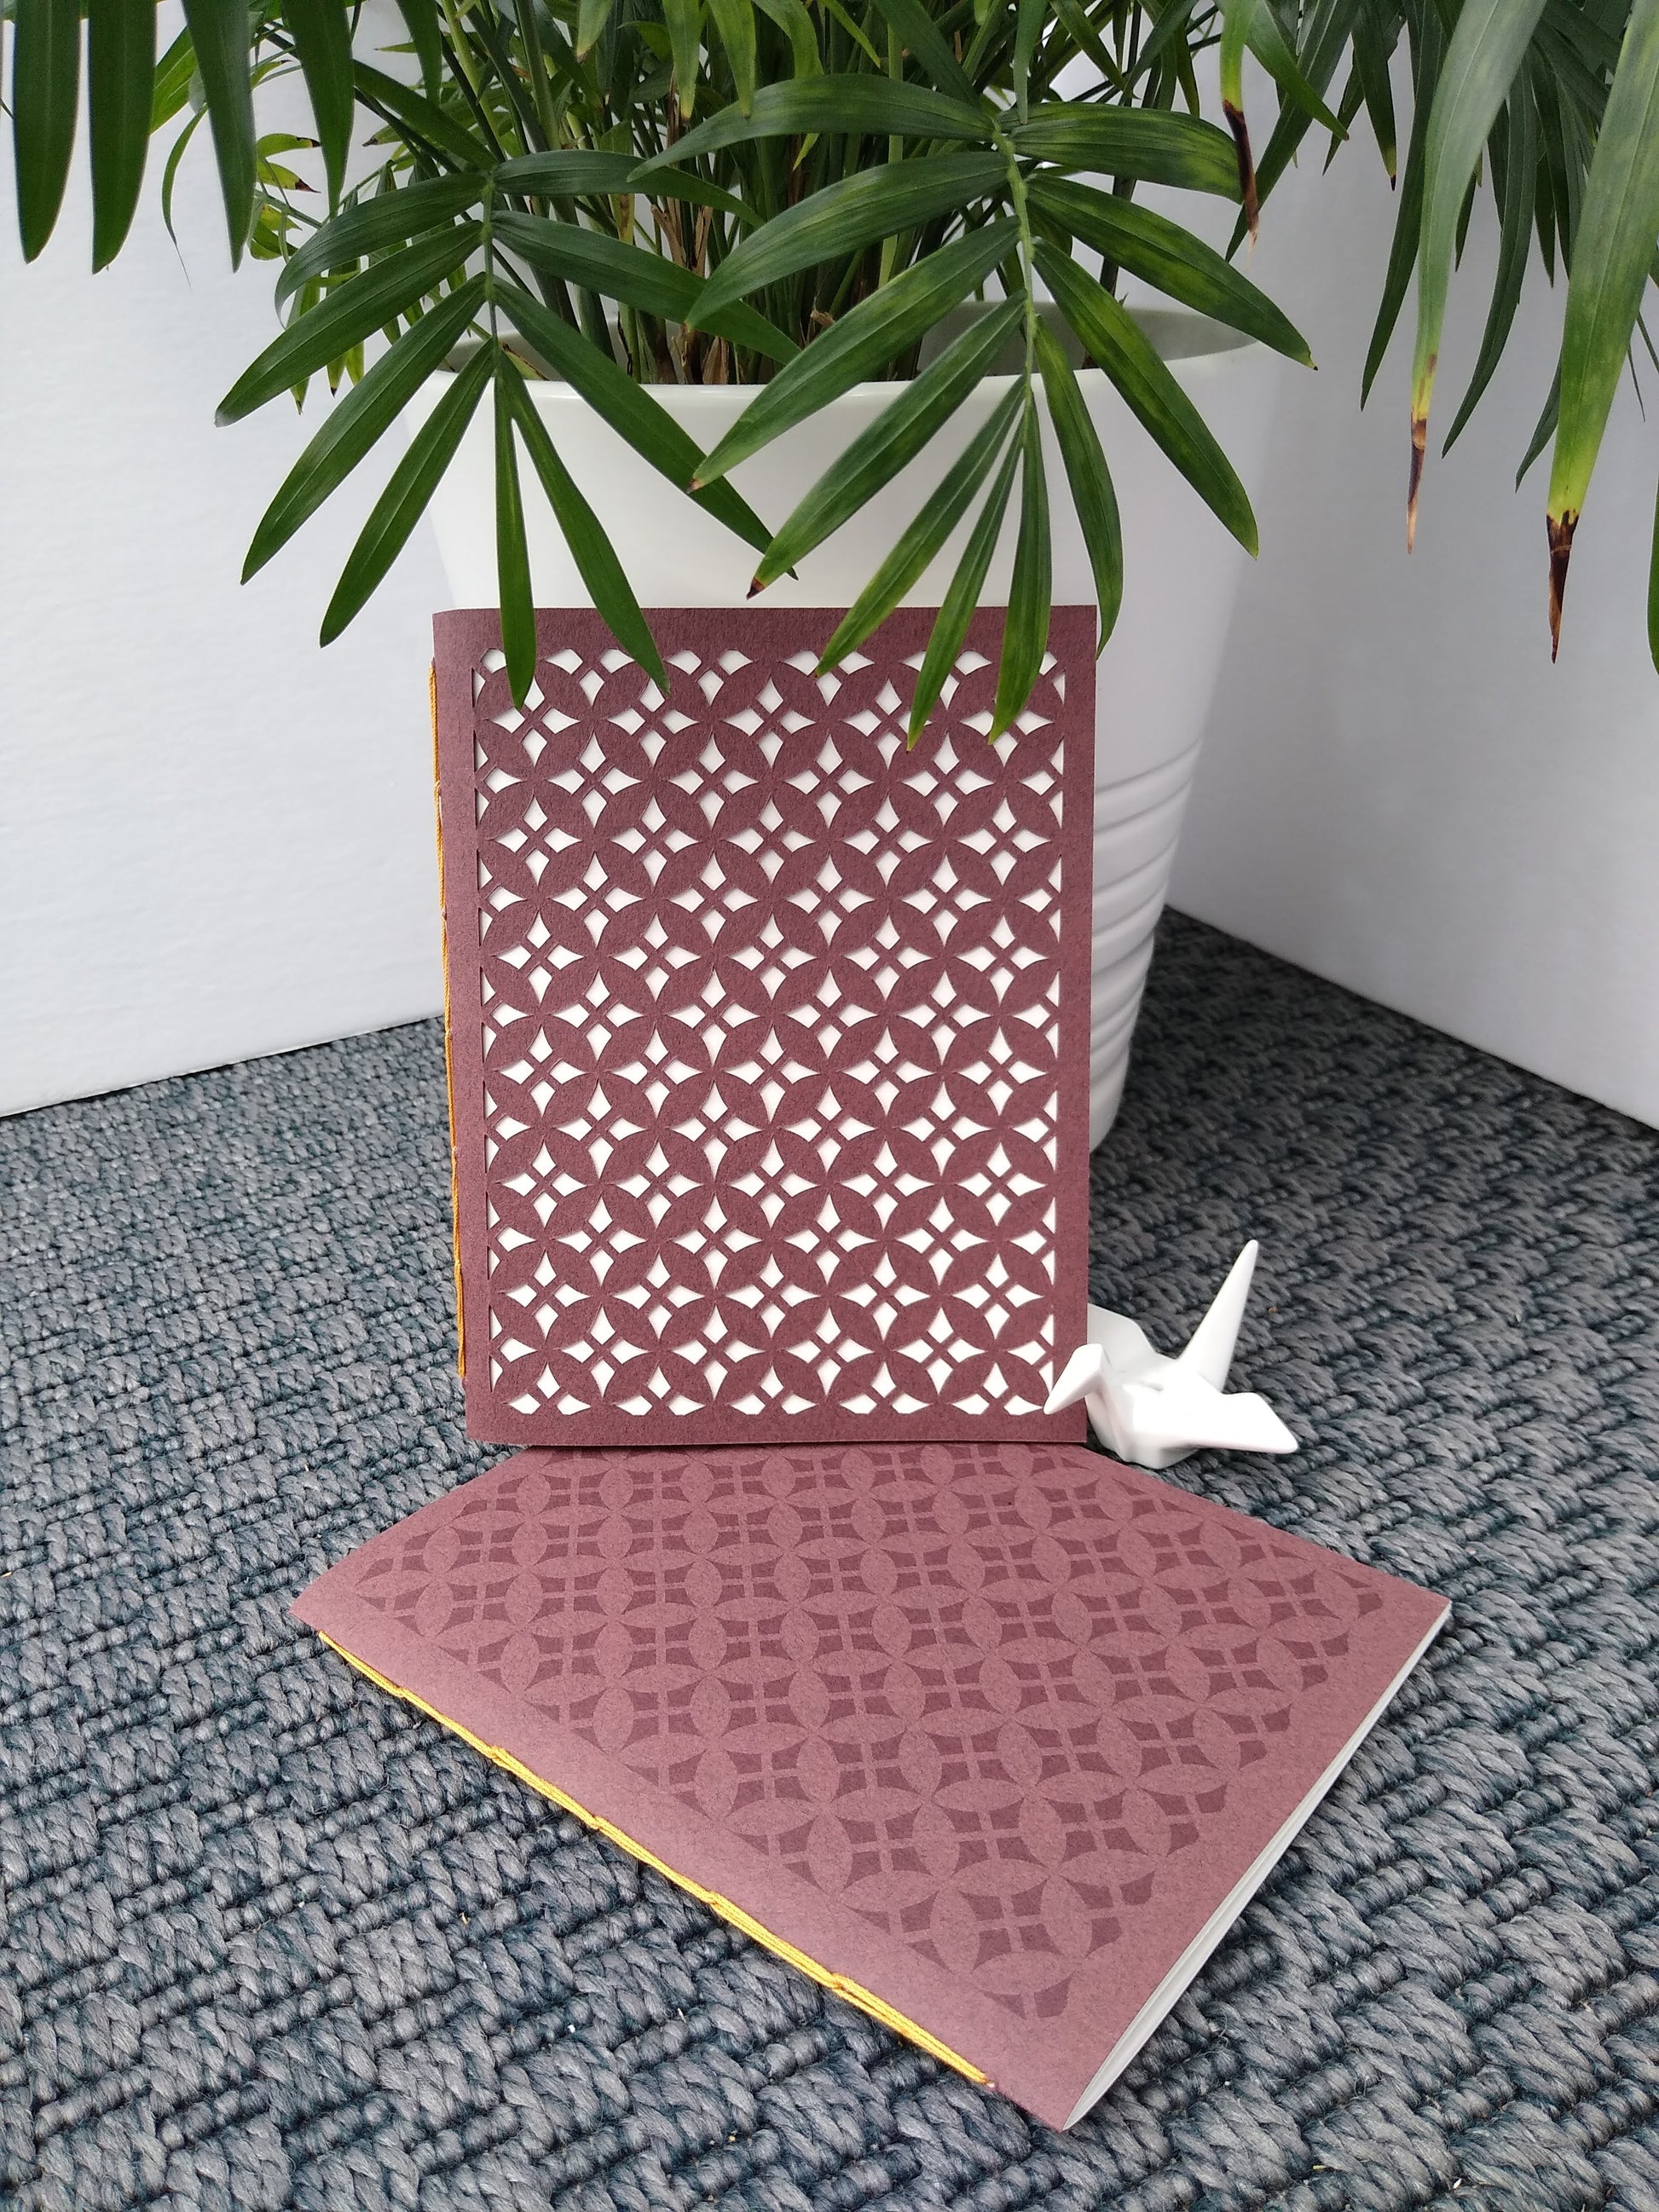 Two burgundy notebooks are displayed on a grey carpet. Next to them is a potted plant and ceramic crane. Both notebooks have a geometric diamond pattern repeated across the entire cover. One is cut the other is printed.